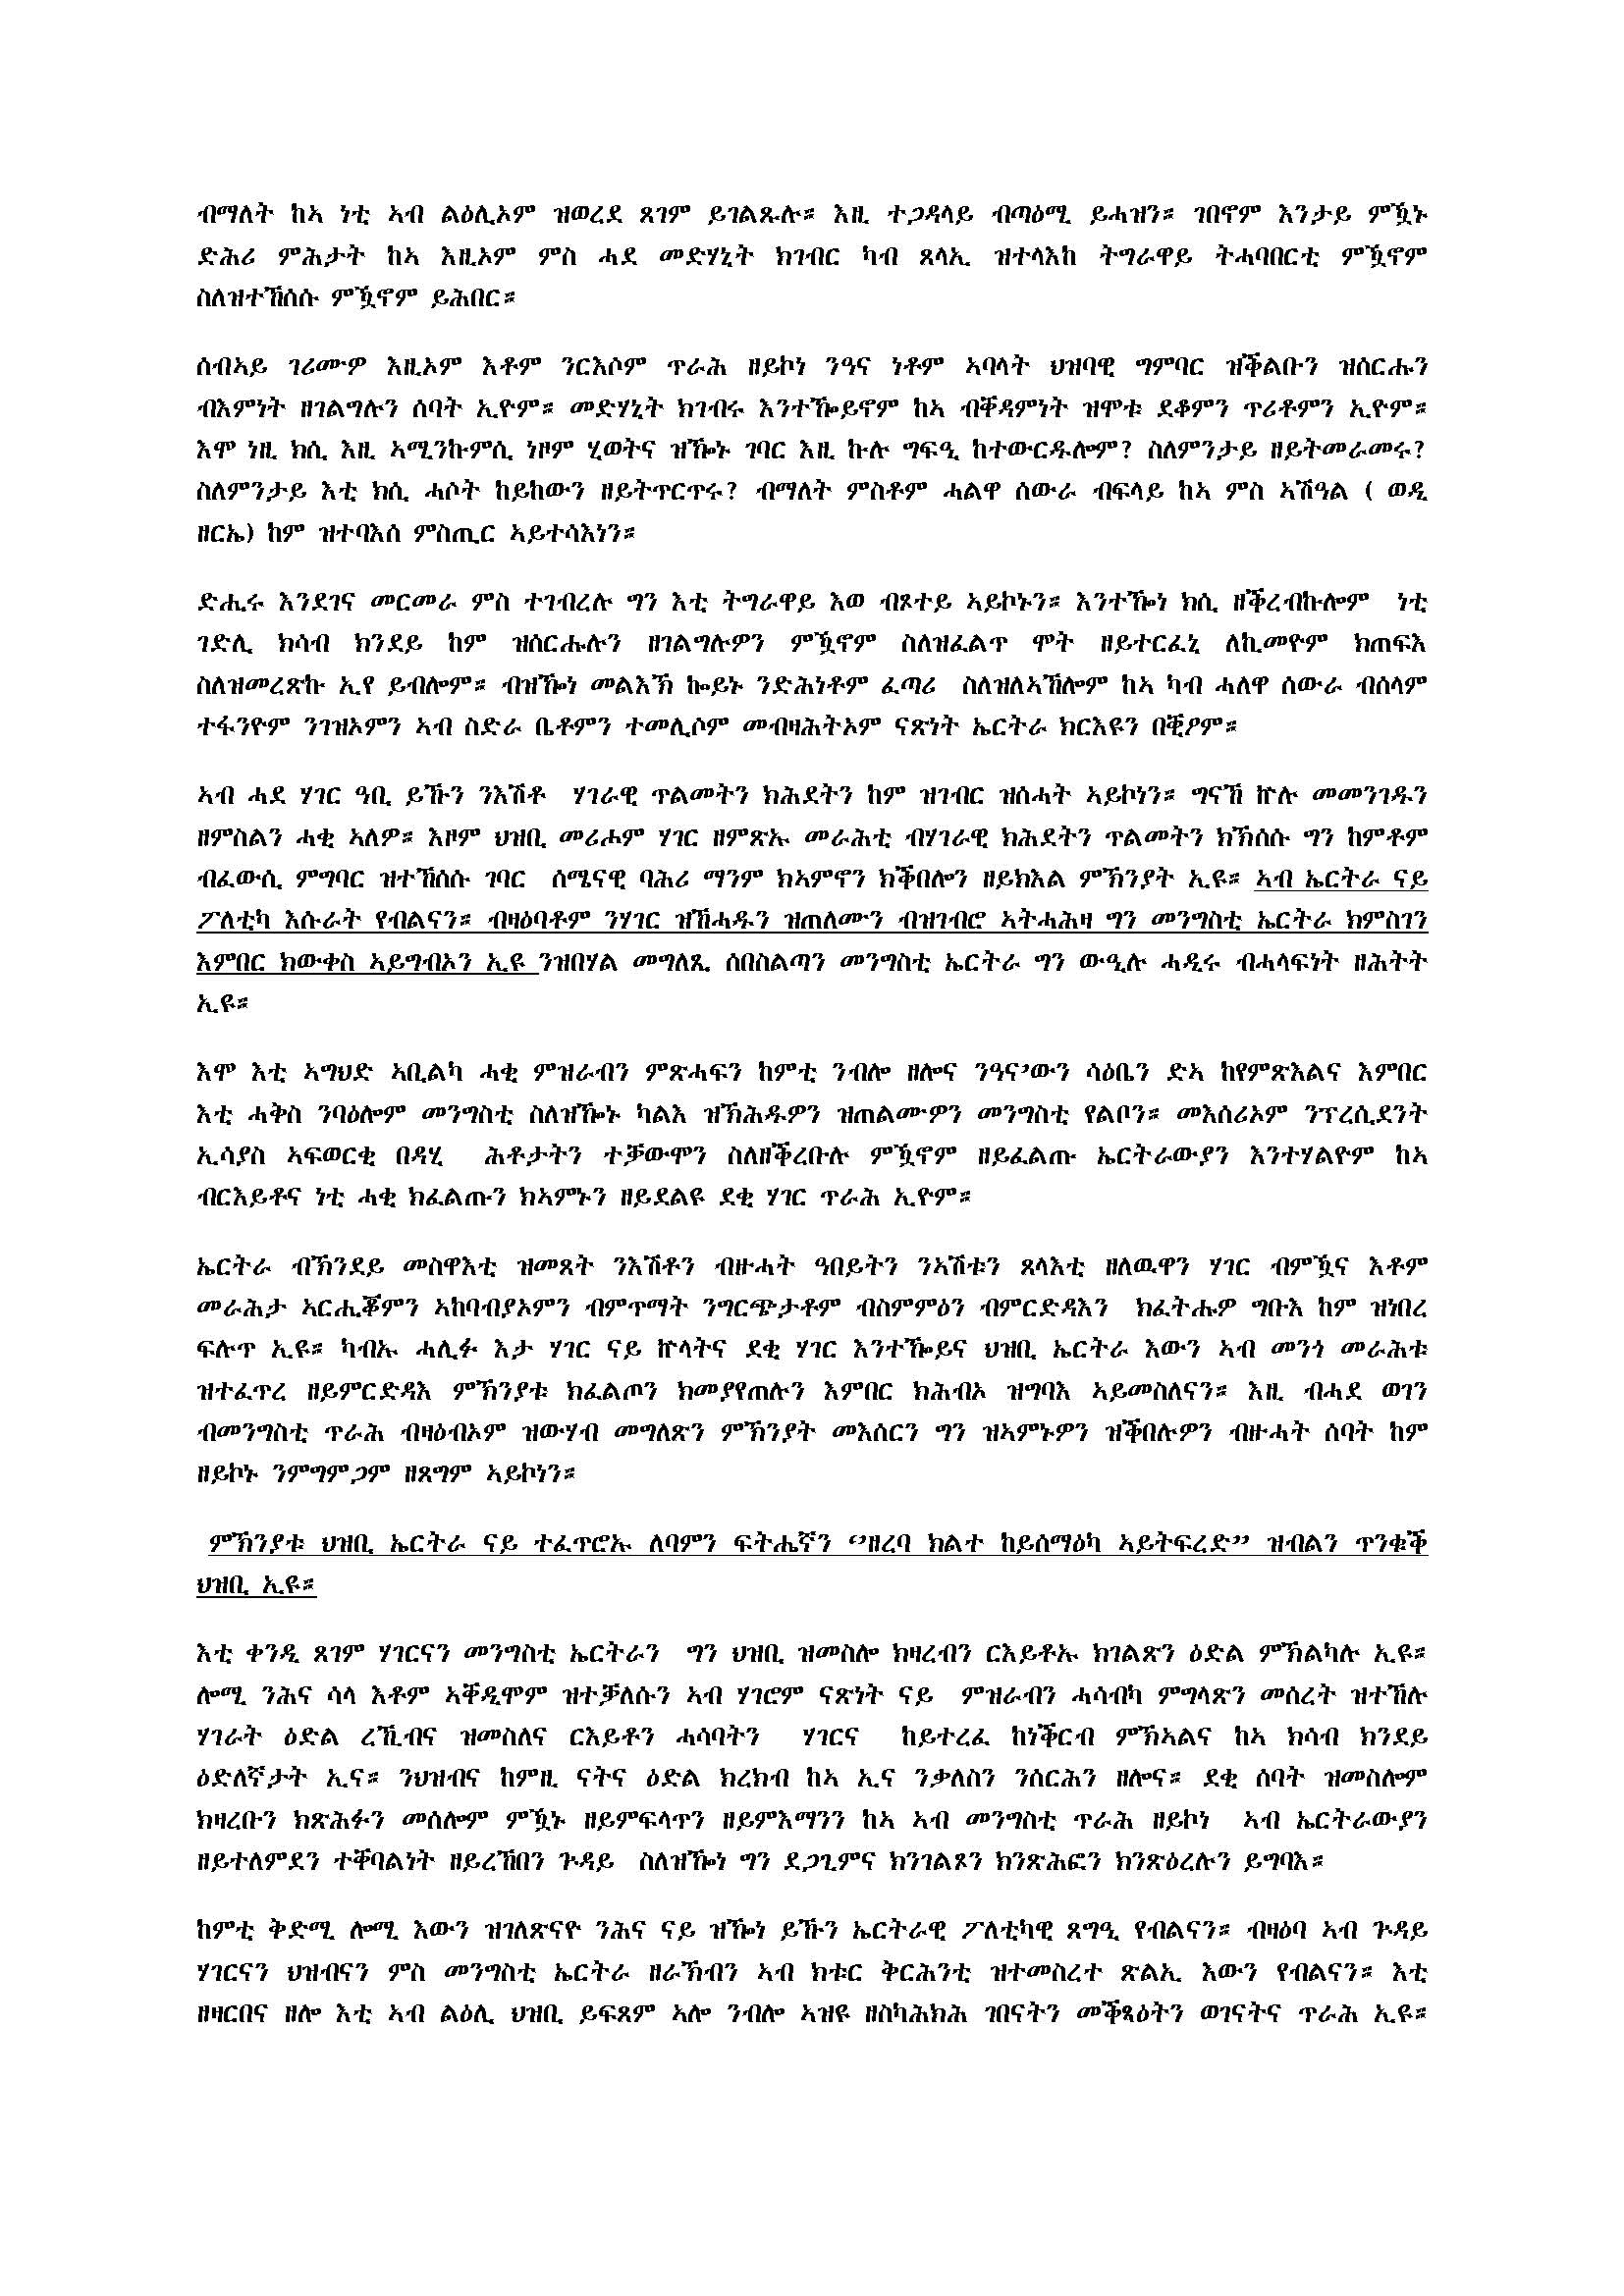 eritrean-opposition-and-demands3_page_4